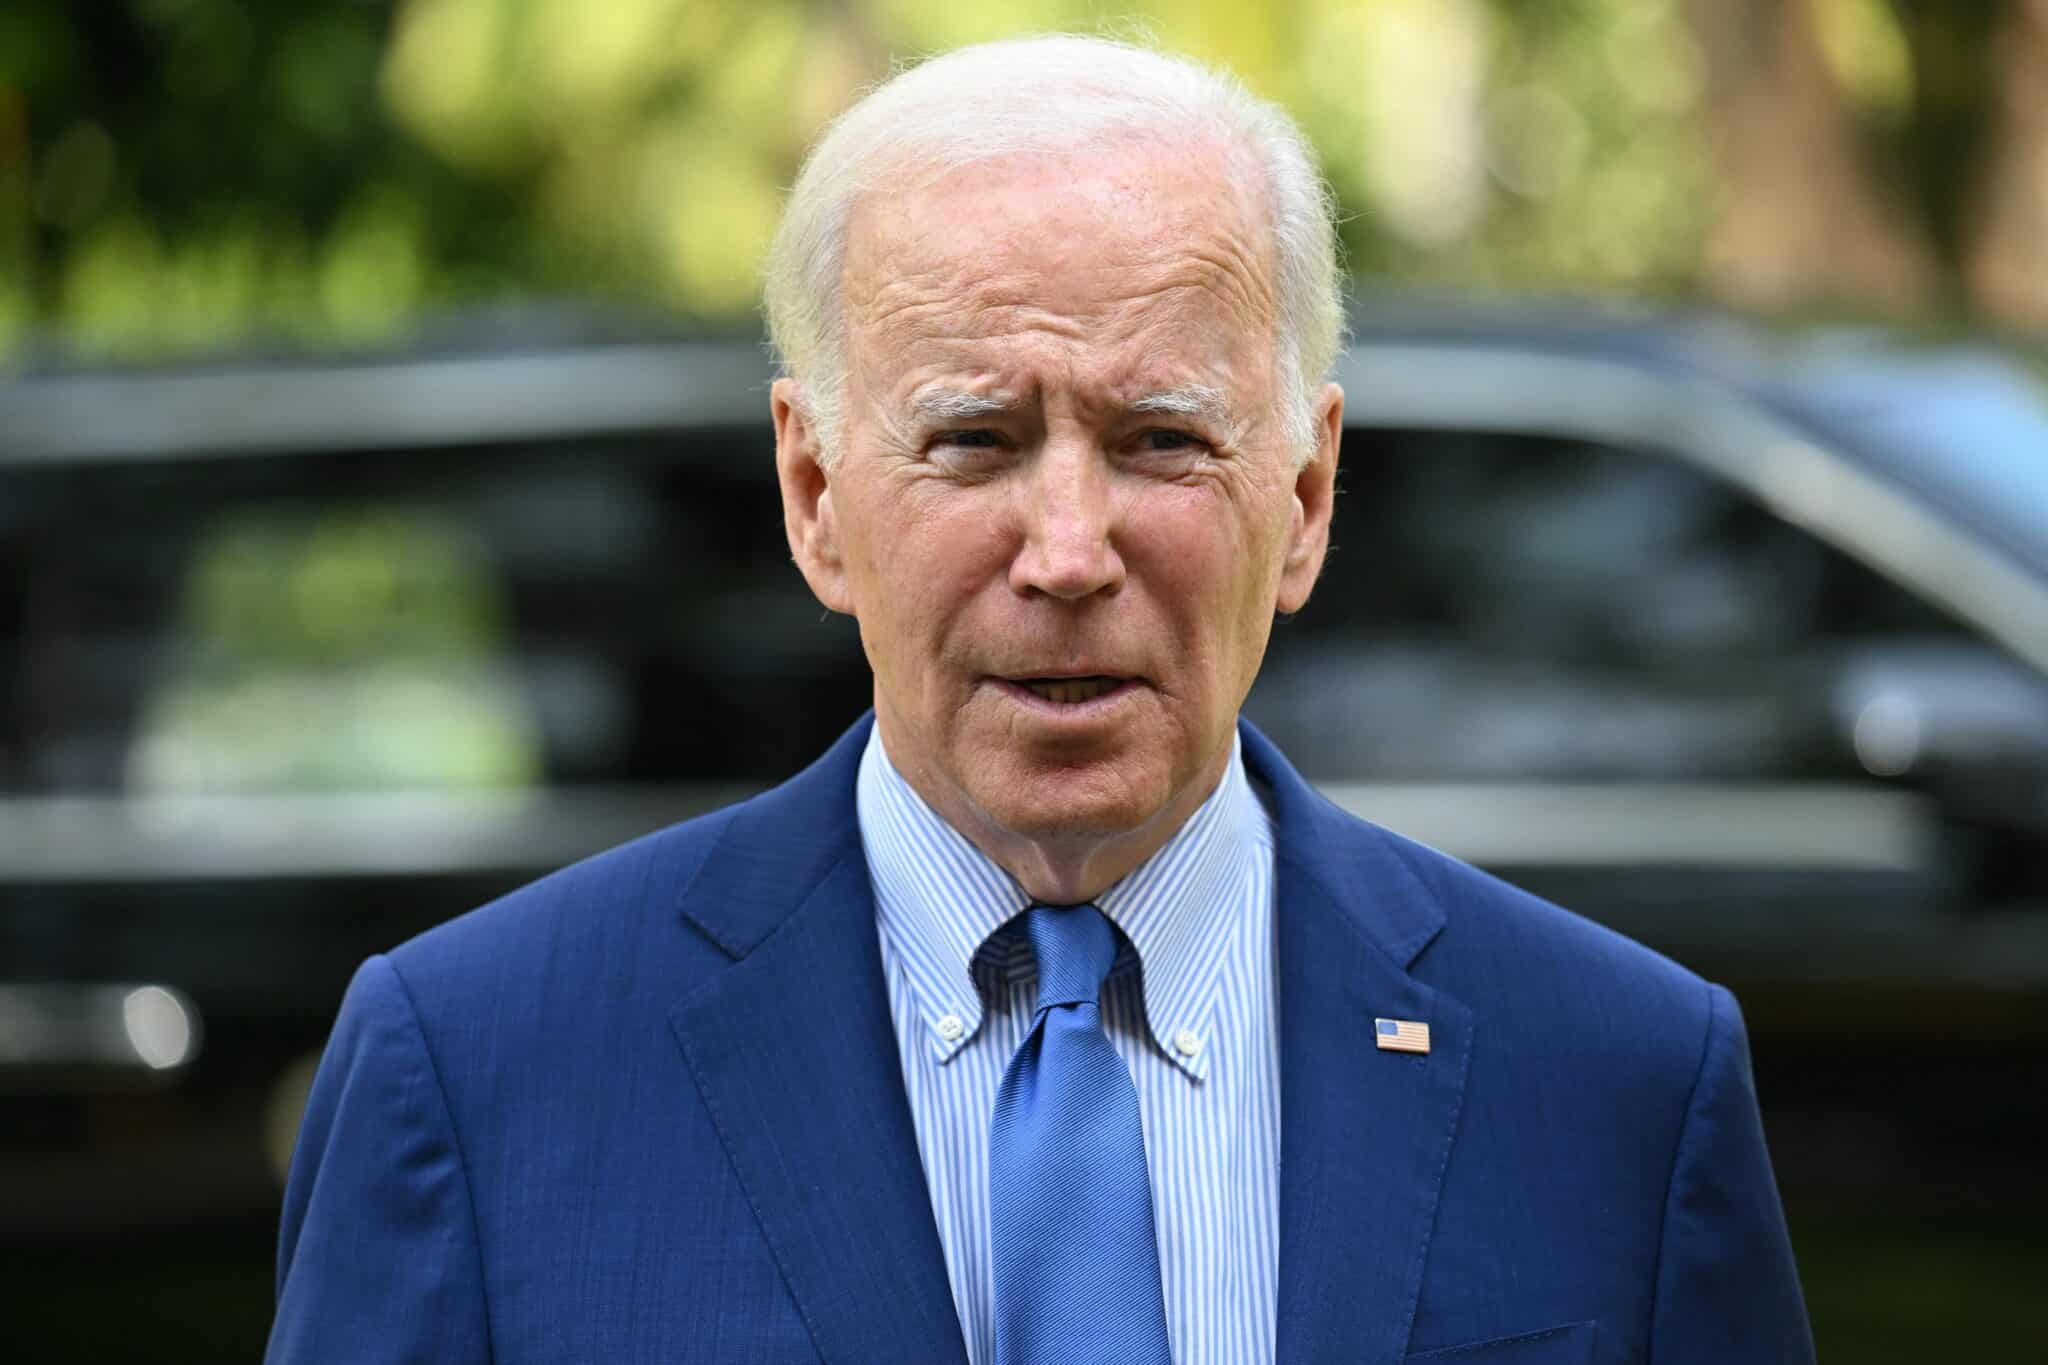 TOPSHOT - US President Joe Biden speaks about the situation in Poland following a meeting with G7 and European leaders on the sidelines of the G20 Summit in Nusa Dua on the Indonesian resort island of Bali on November 16, 2022. (Photo by SAUL LOEB / AFP) (Photo by SAUL LOEB/AFP via Getty Images)